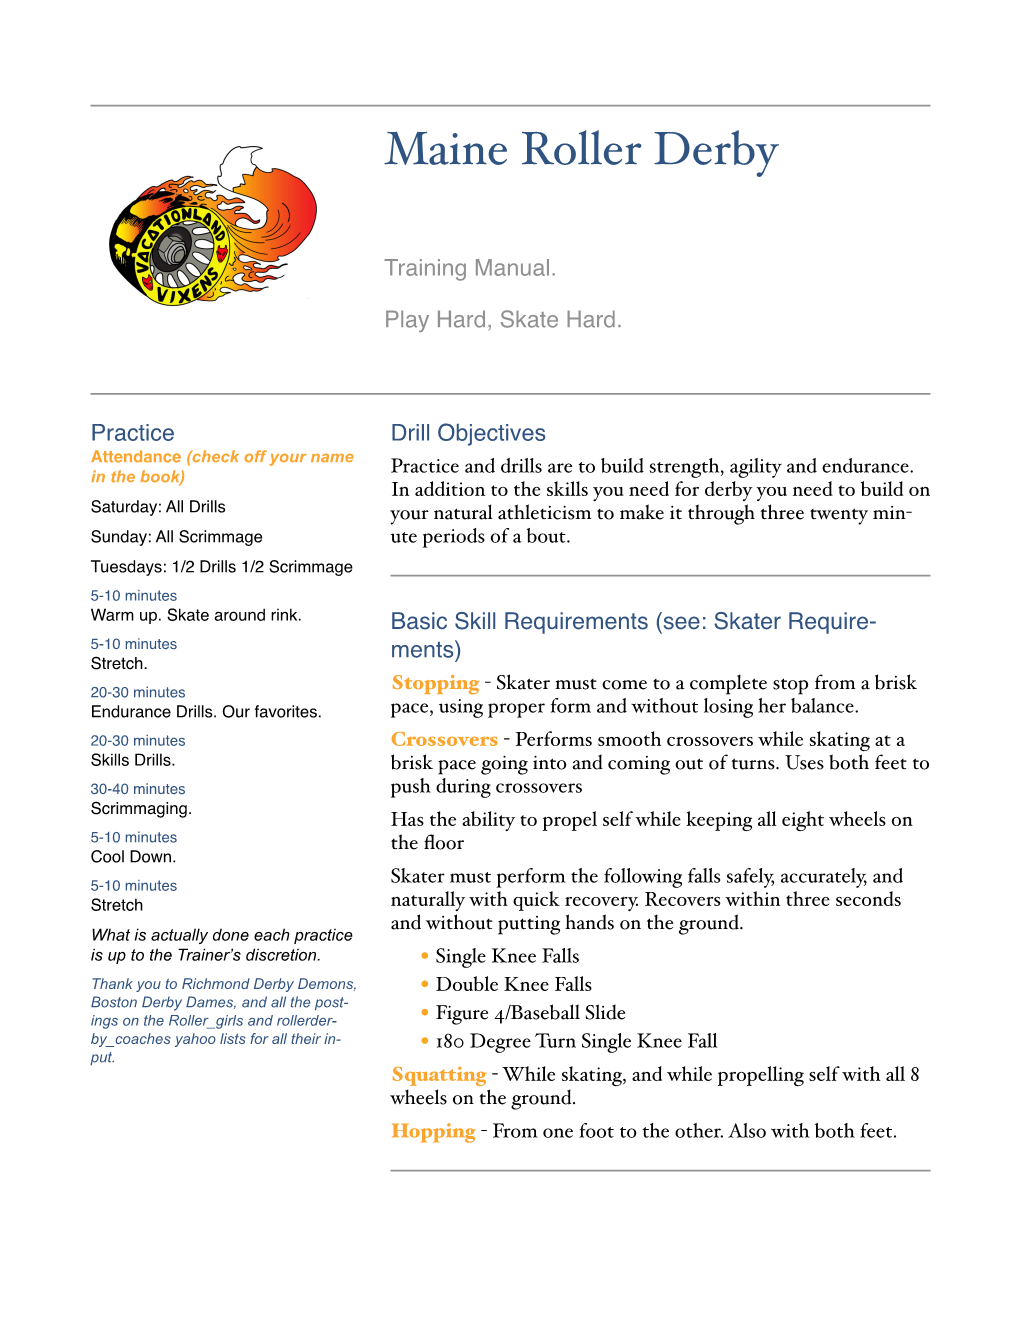 Maine Roller Derby Training Manual